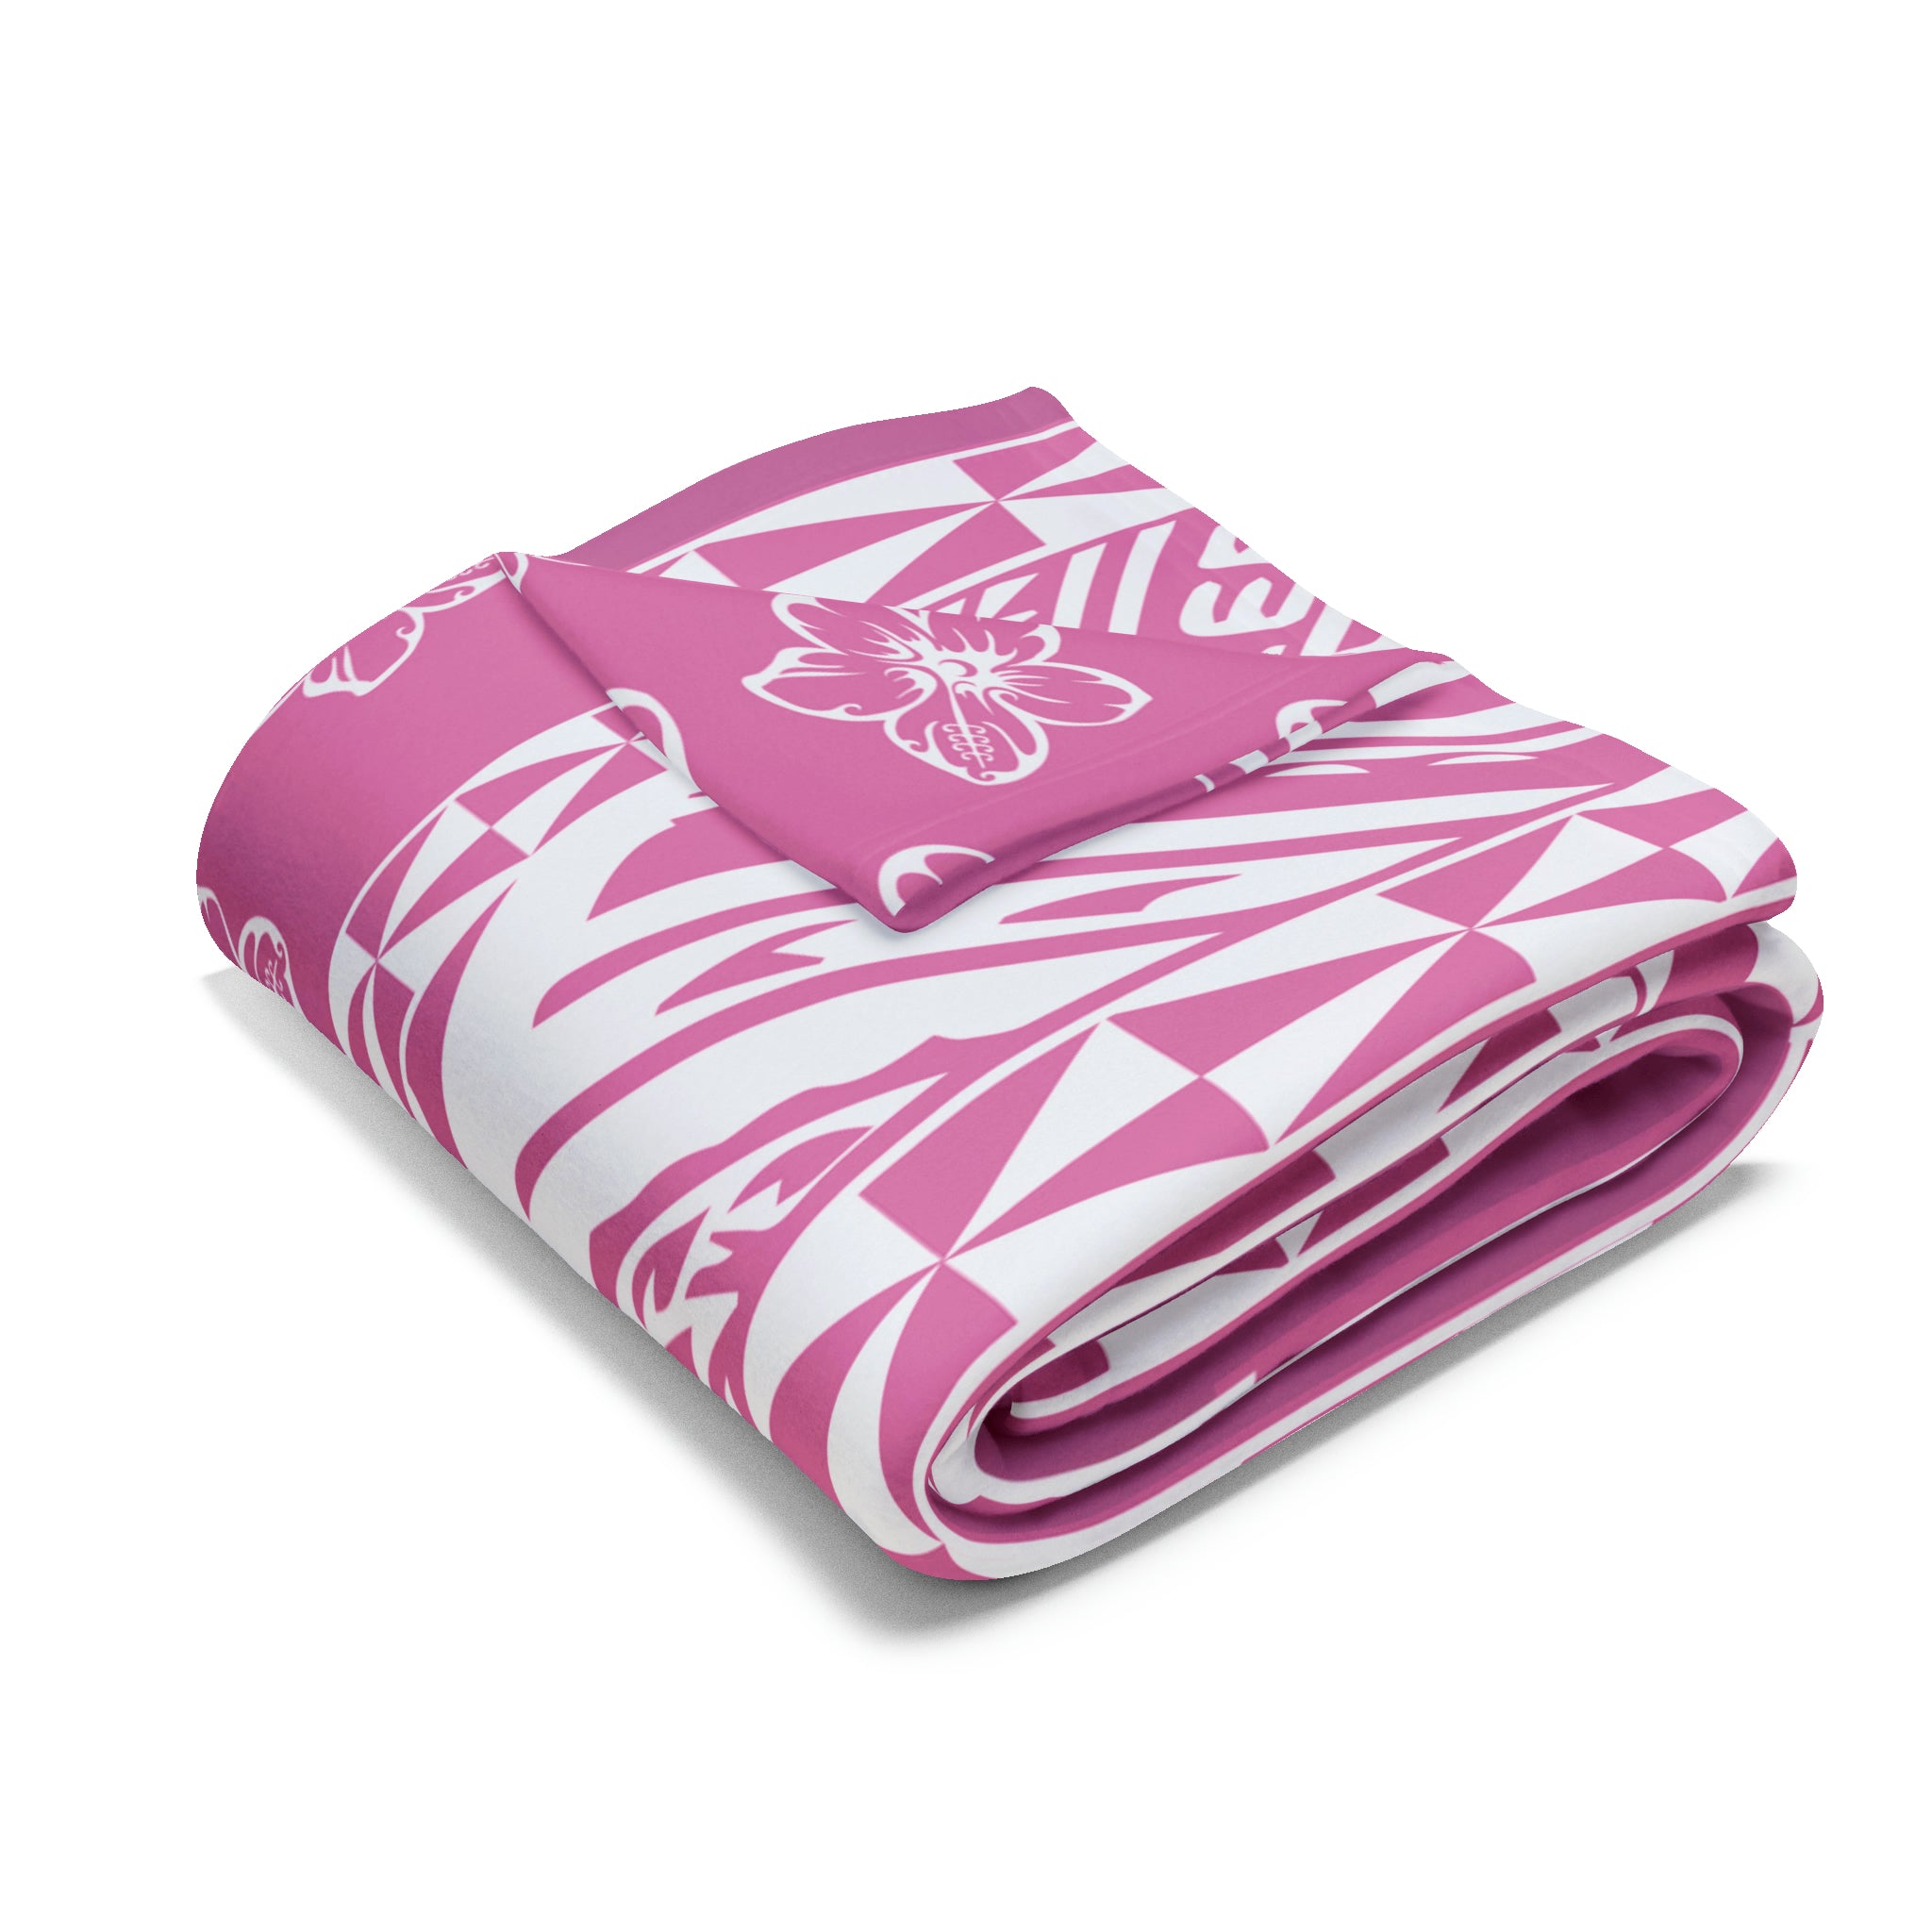 South Pac Paisley Blanket Pink